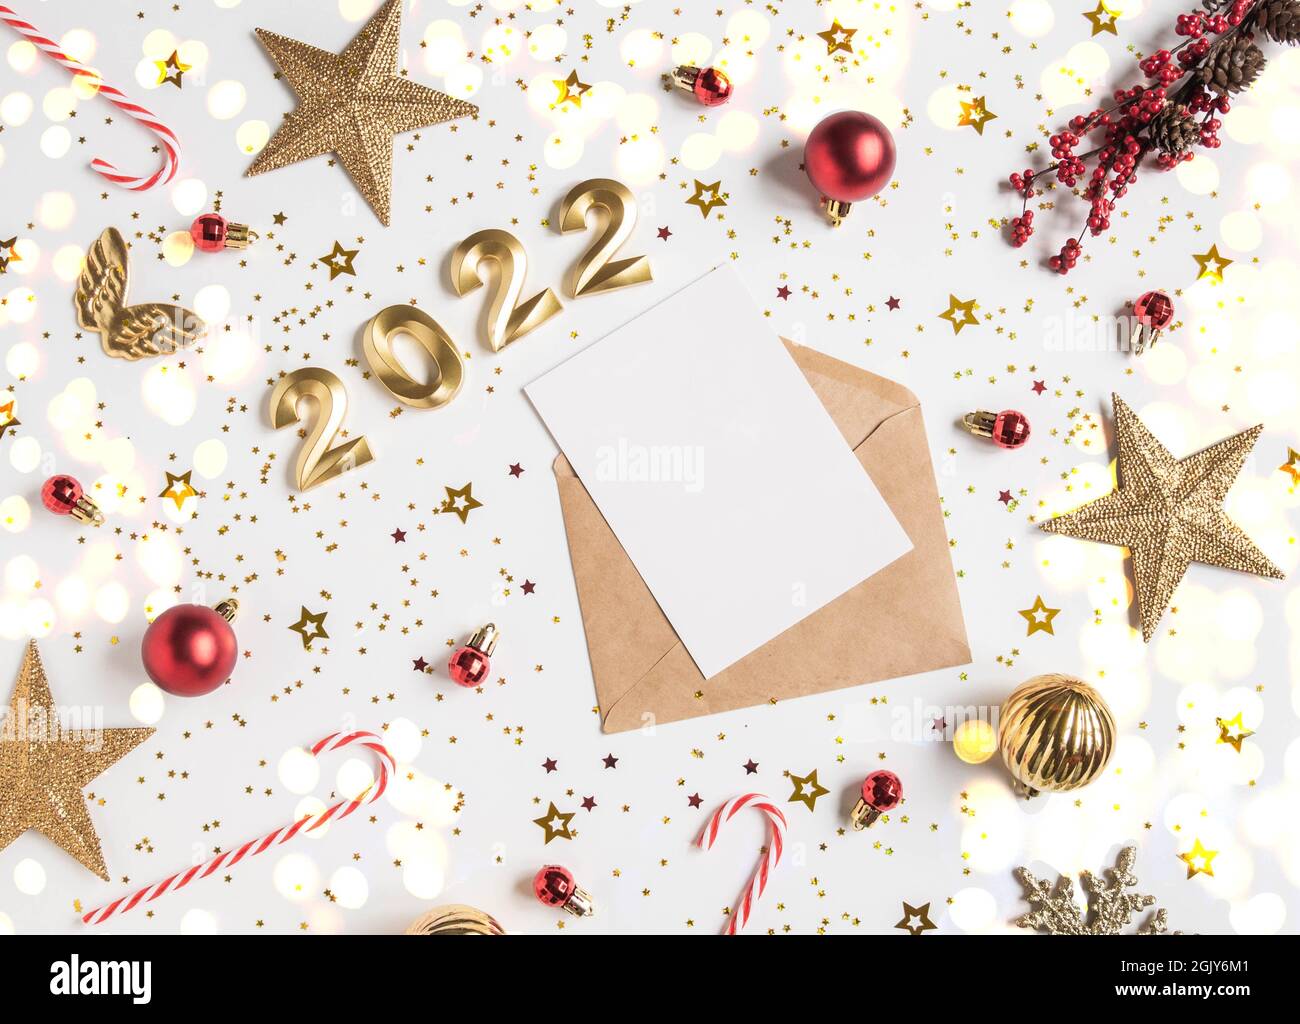 Open brown envelope with blank white card and numbers of 2022 for the coming year and festive seasonal decorations on white background. Top view. Stock Photo